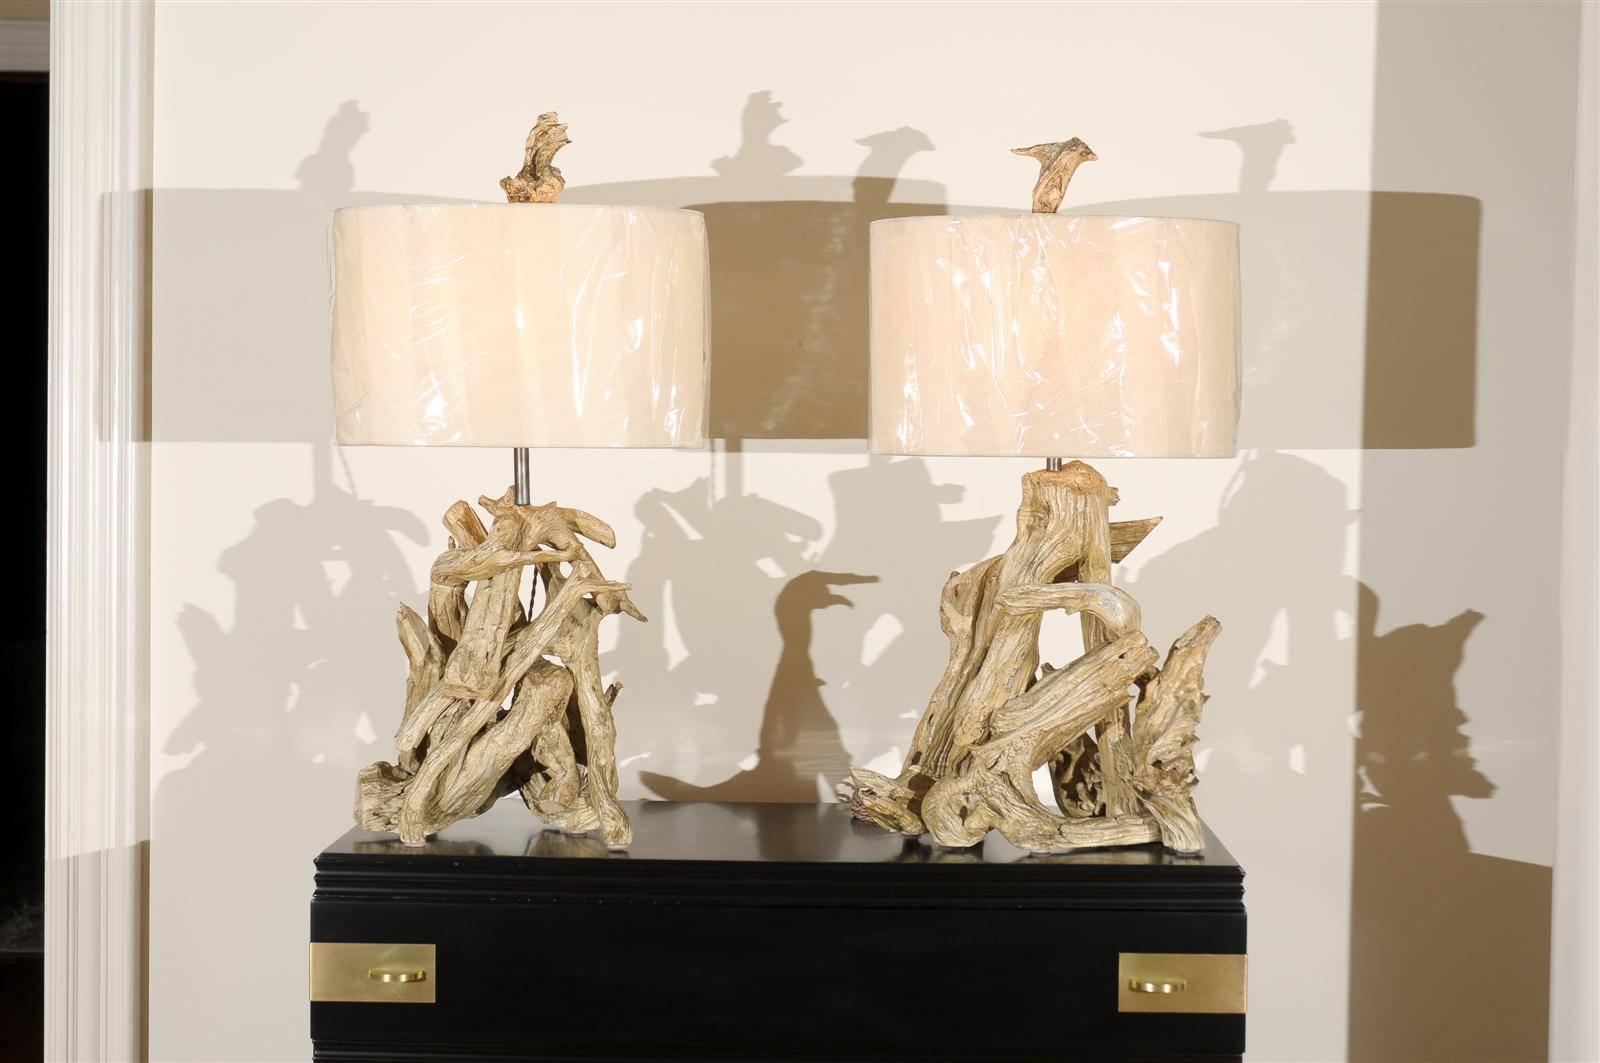 A fabulous pair of vintage driftwood lamps (West Coast USA, circa 1950). Beautiful aged Gesso finish with subtle moss and grey highlights. Wonderful scale and patina. Exquisitely made pieces. Organic sculpture as lighting. Excellent restored